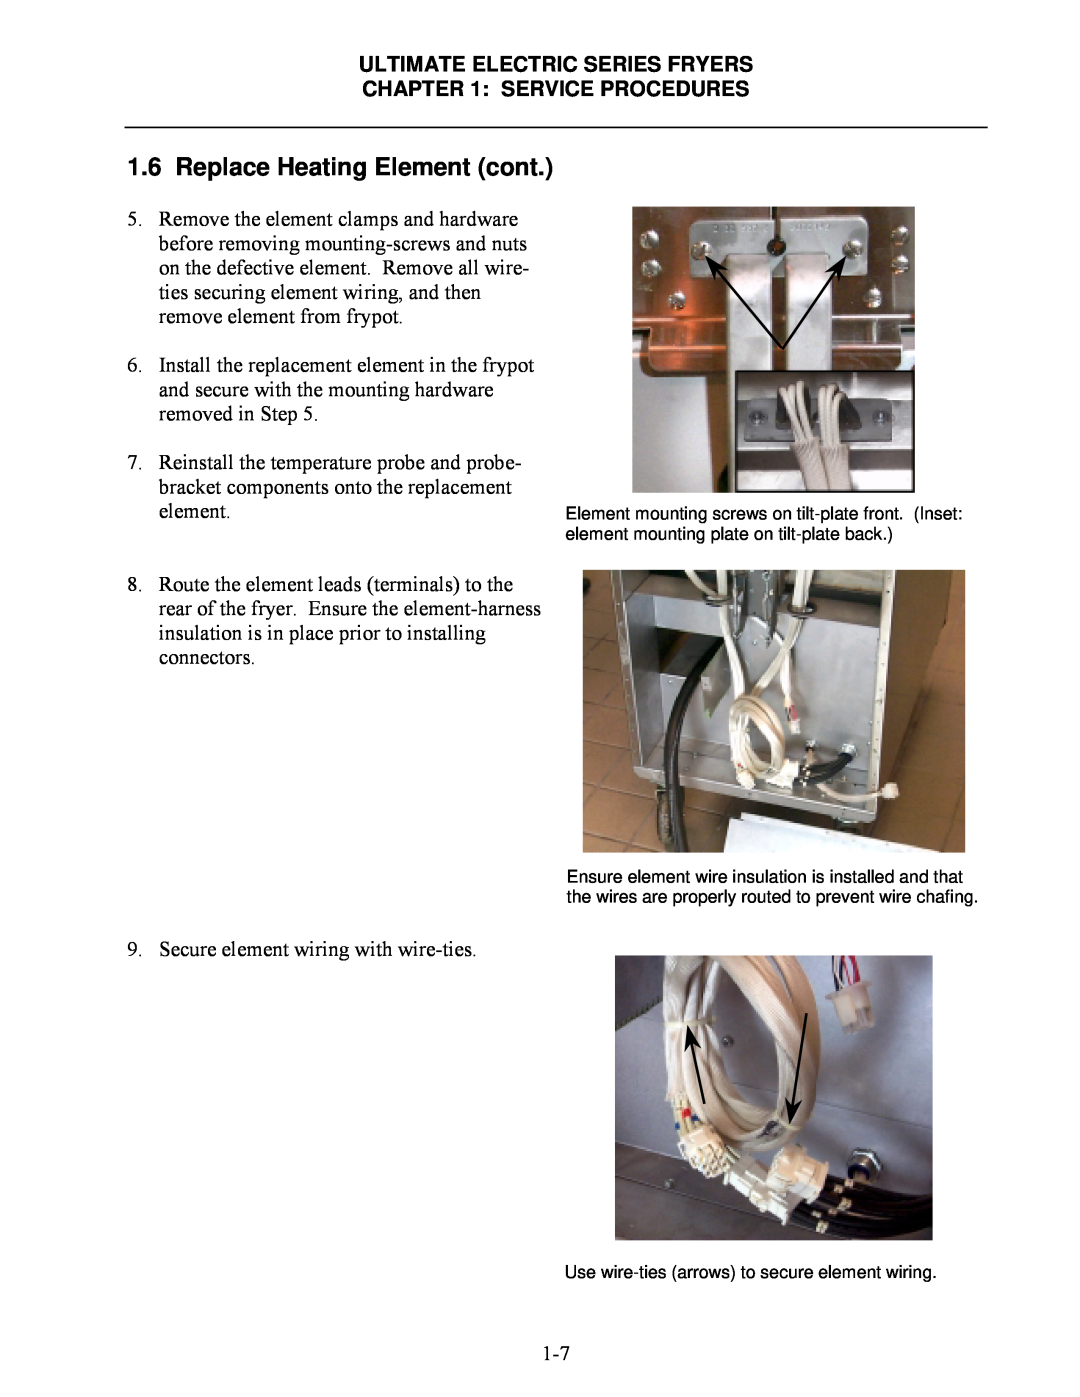 Frymaster manual Replace Heating Element cont, Ultimate Electric Series Fryers, Service Procedures 